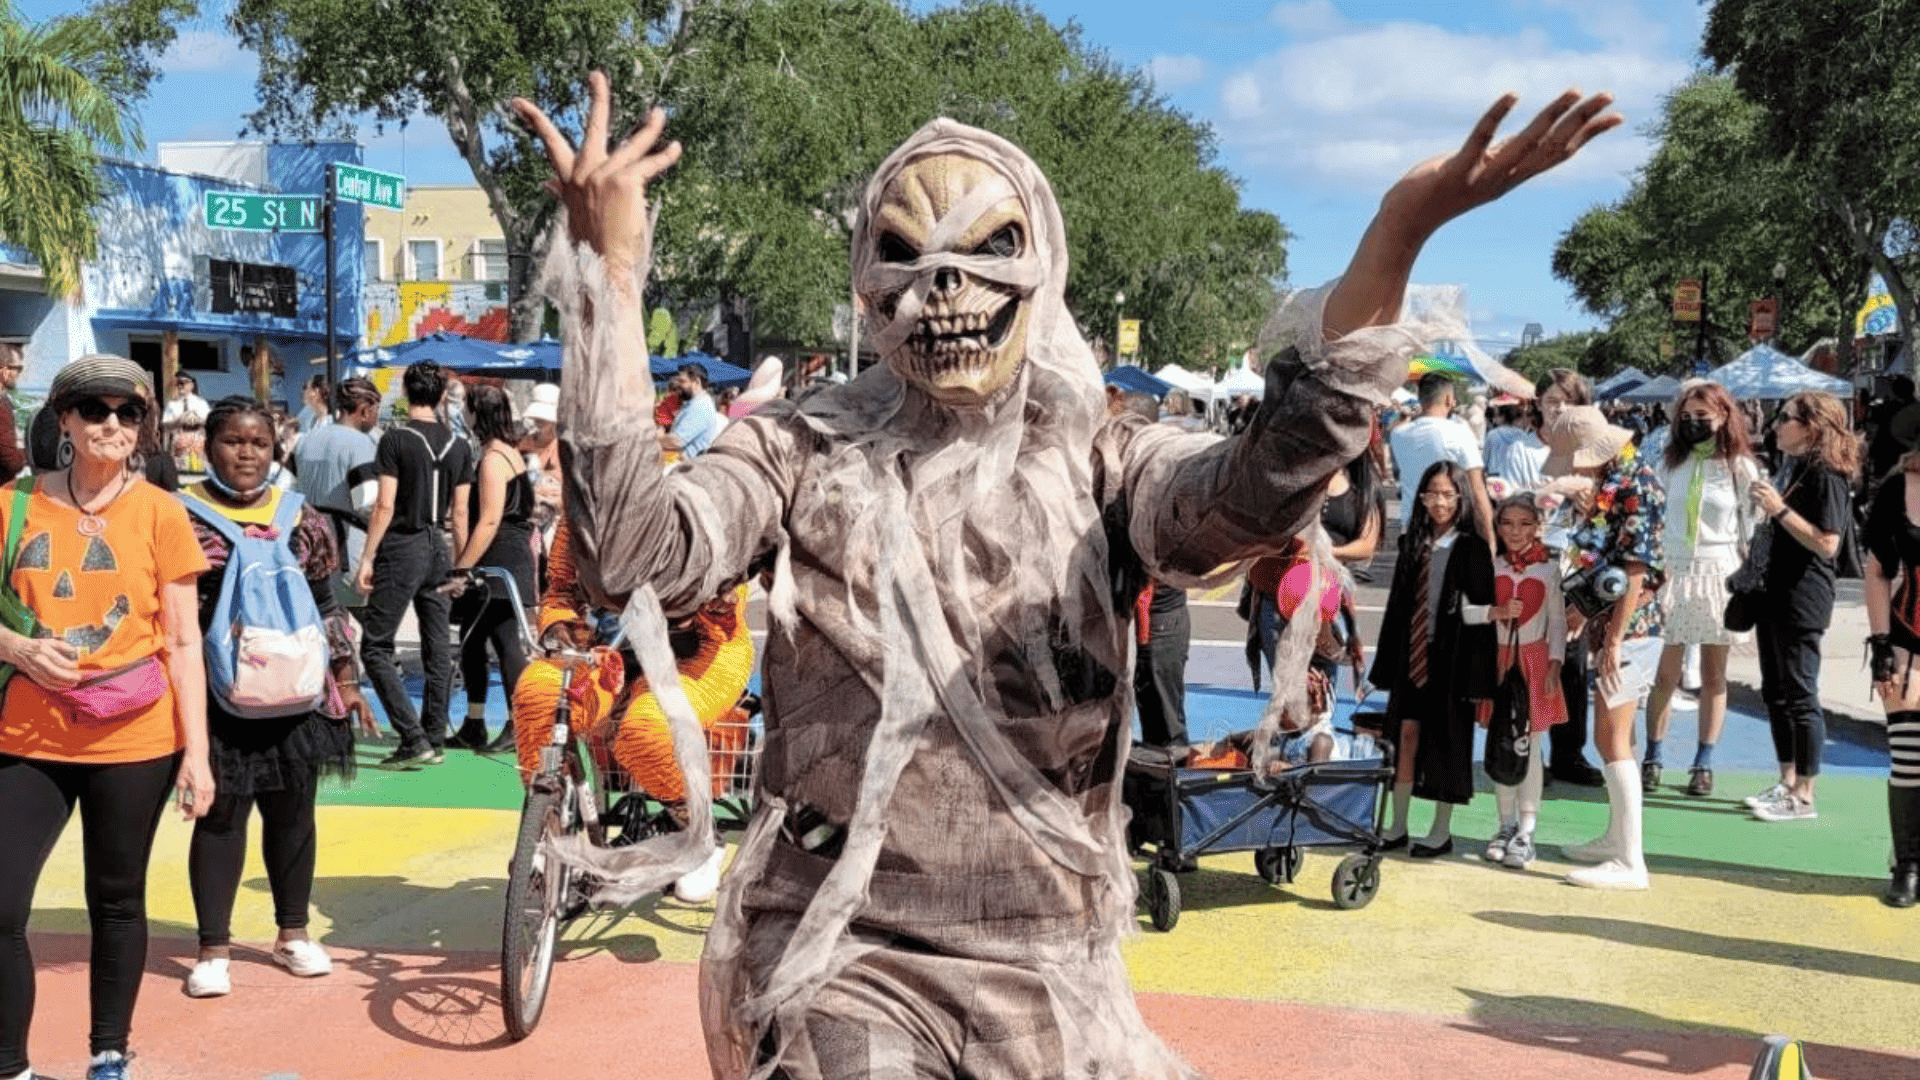 Twomile 'Halloween On Central' street carnival is officially back for